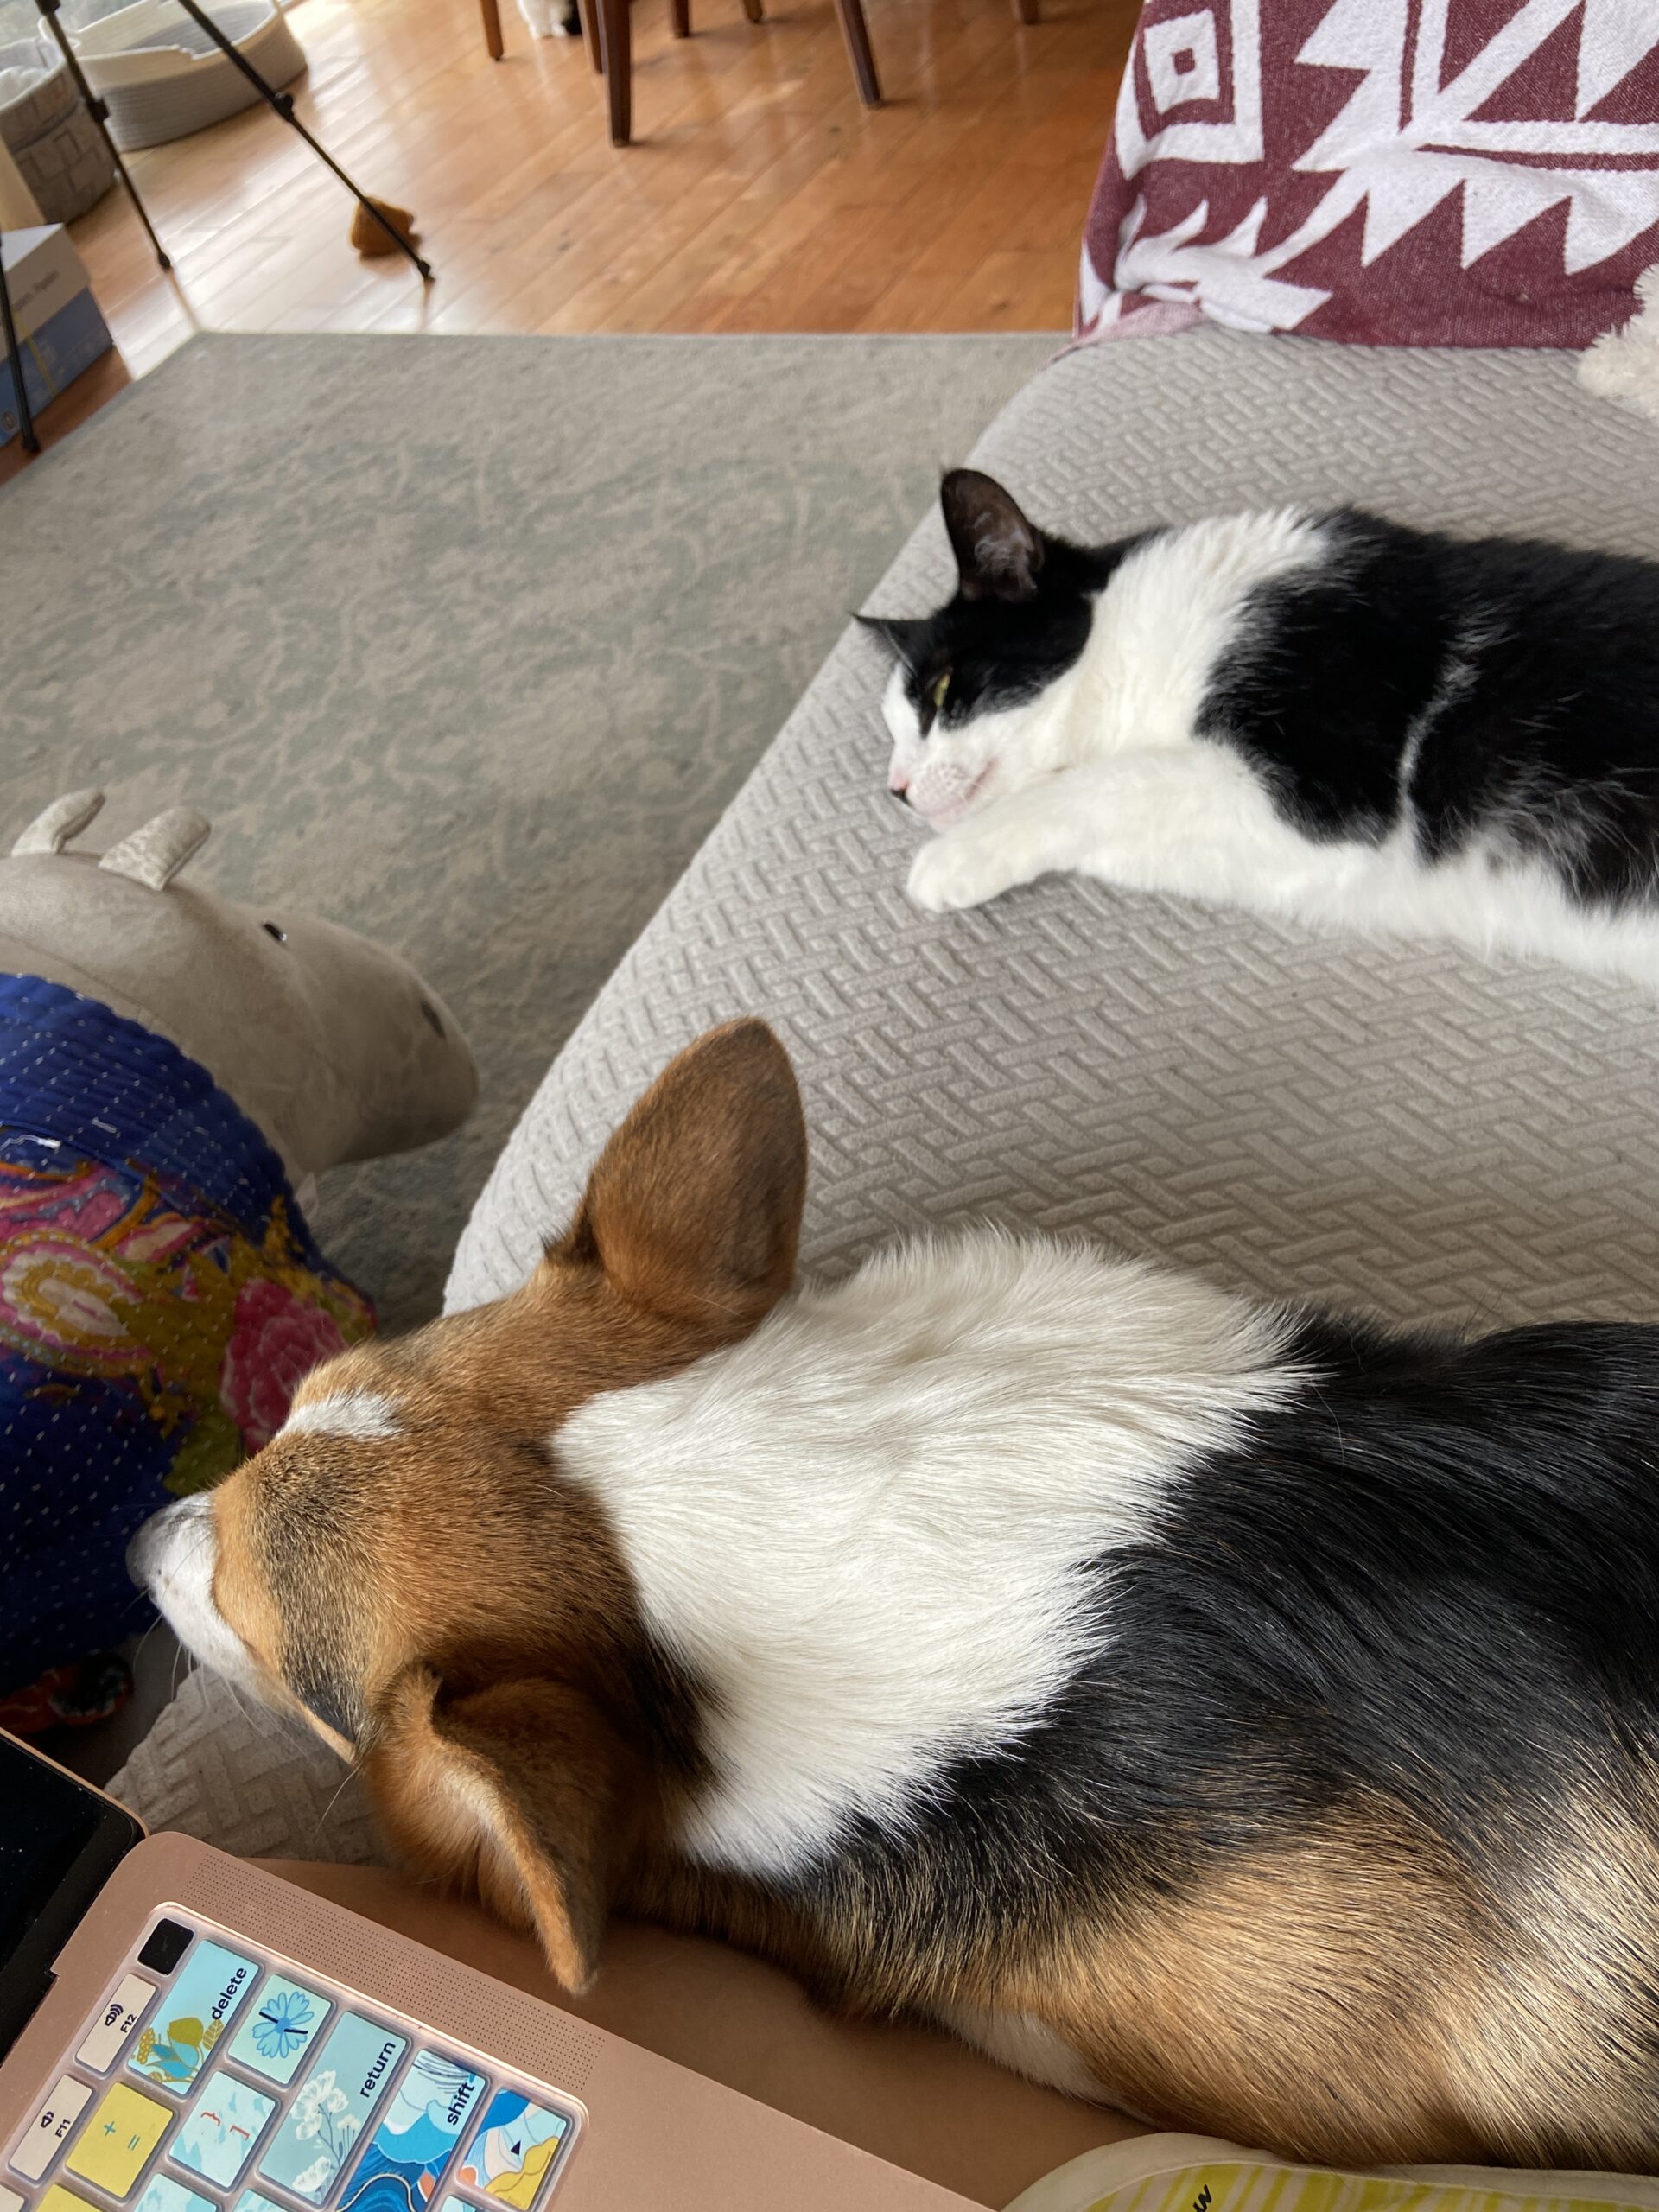 Corgi and black and white cat napping next to each other